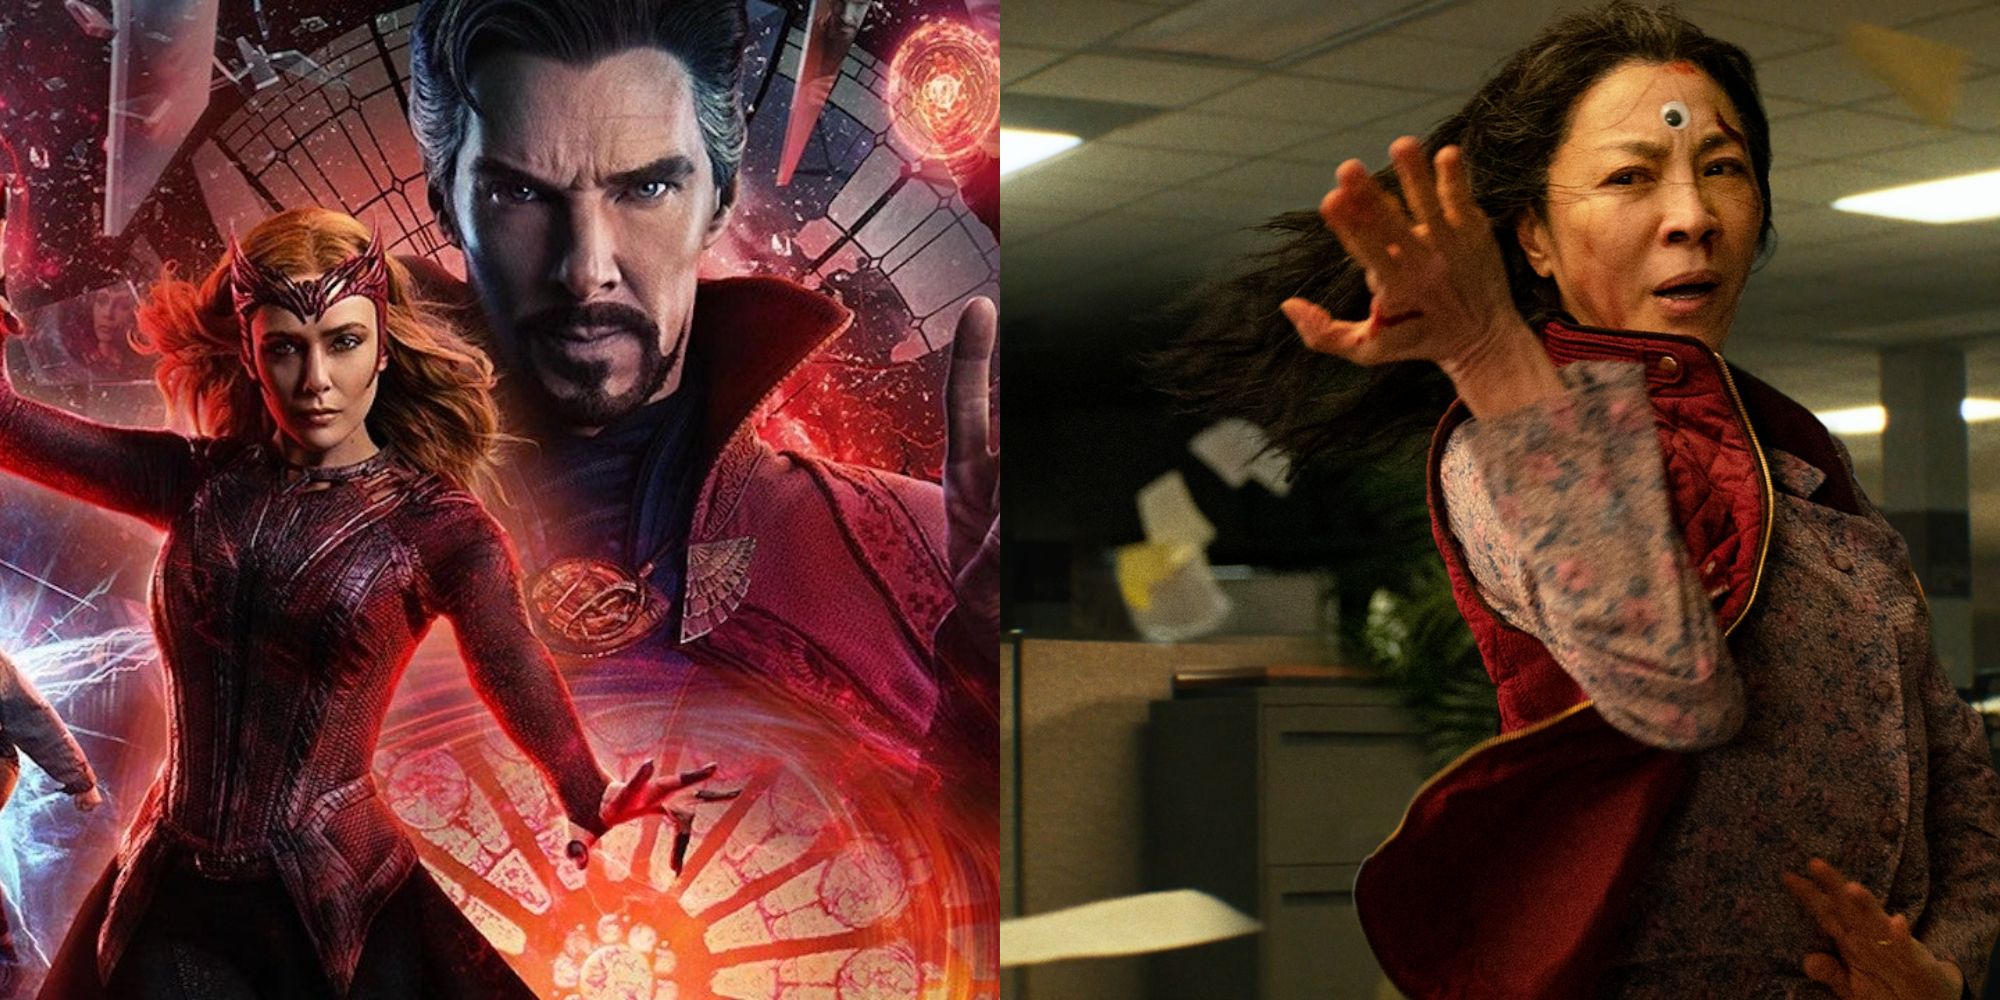 Characters from Doctor Strange in the Multiverse of Madness and Everything Everywhere All at Once